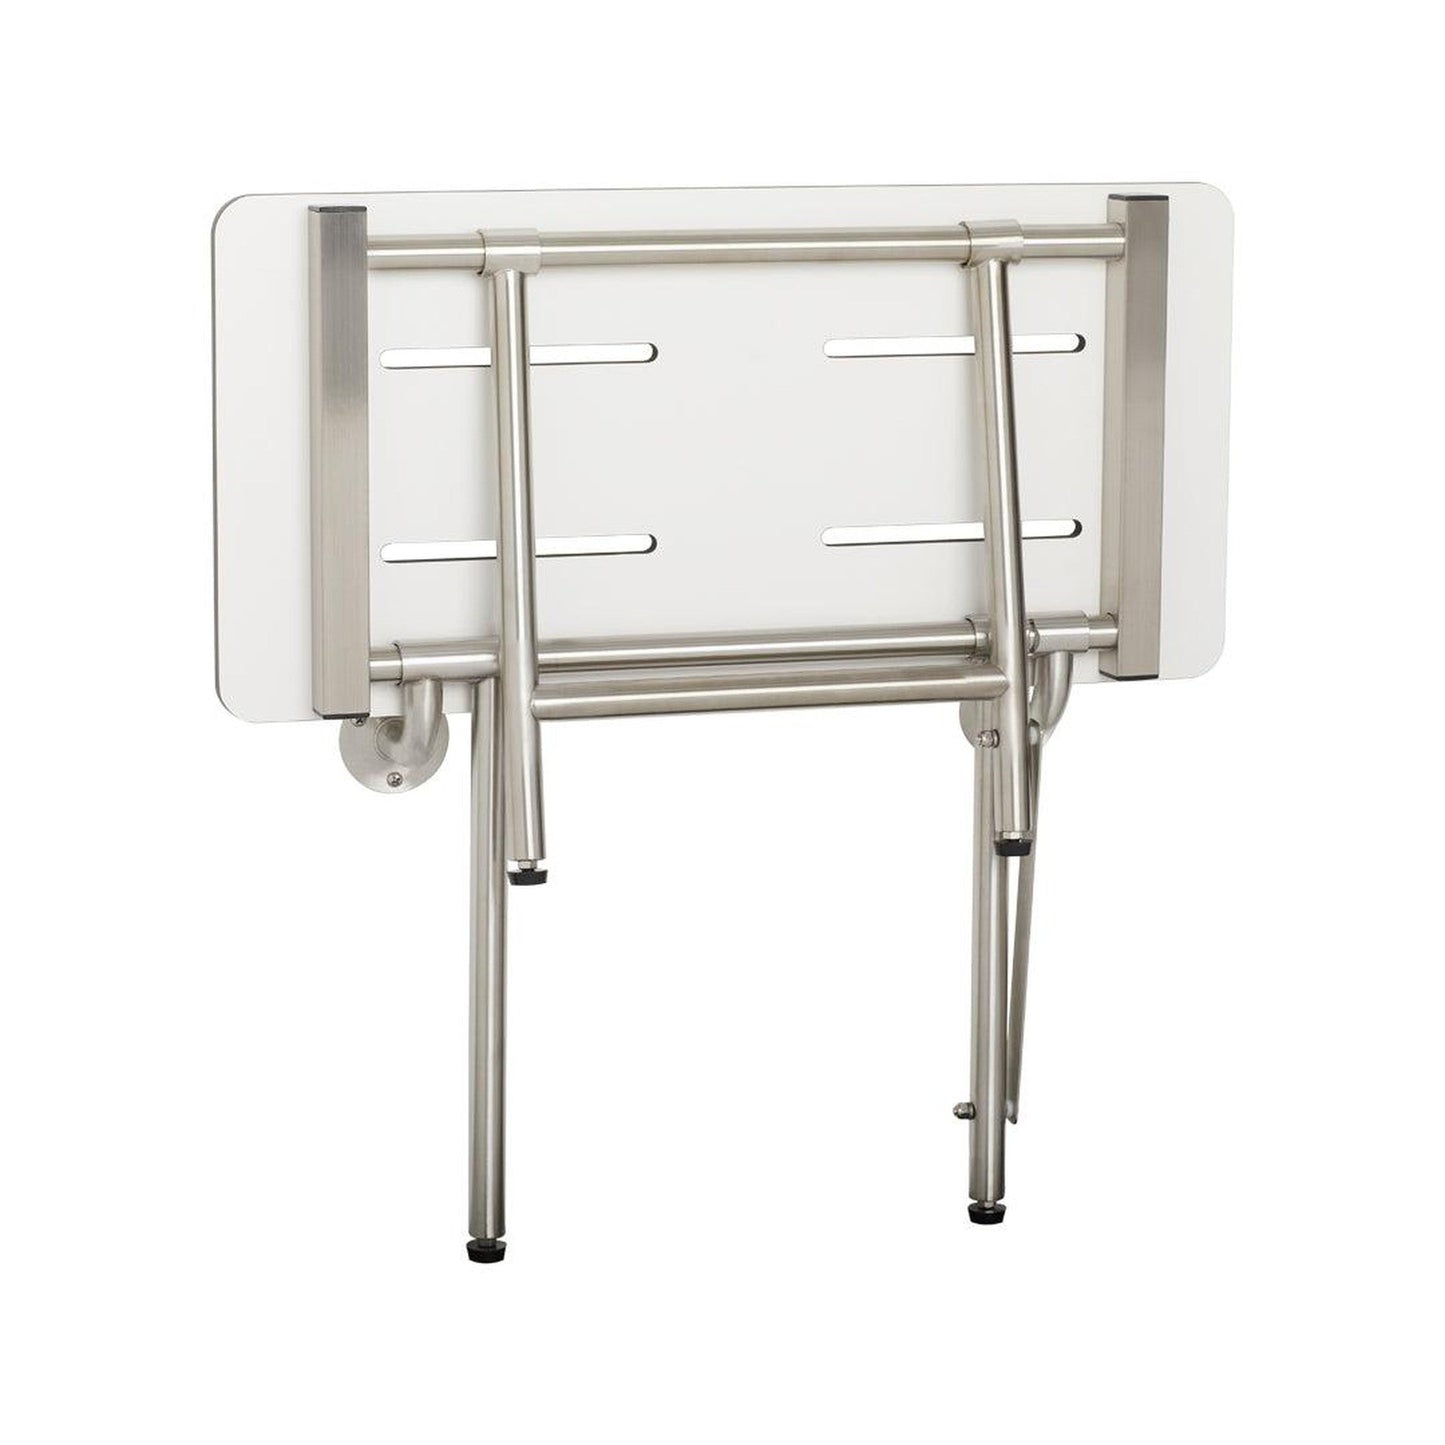 Seachrome Signature Series 24" W x 15" D White One-Piece Solid Phenolic Seat Top Bench Shower Seat With Swing-Down Legs